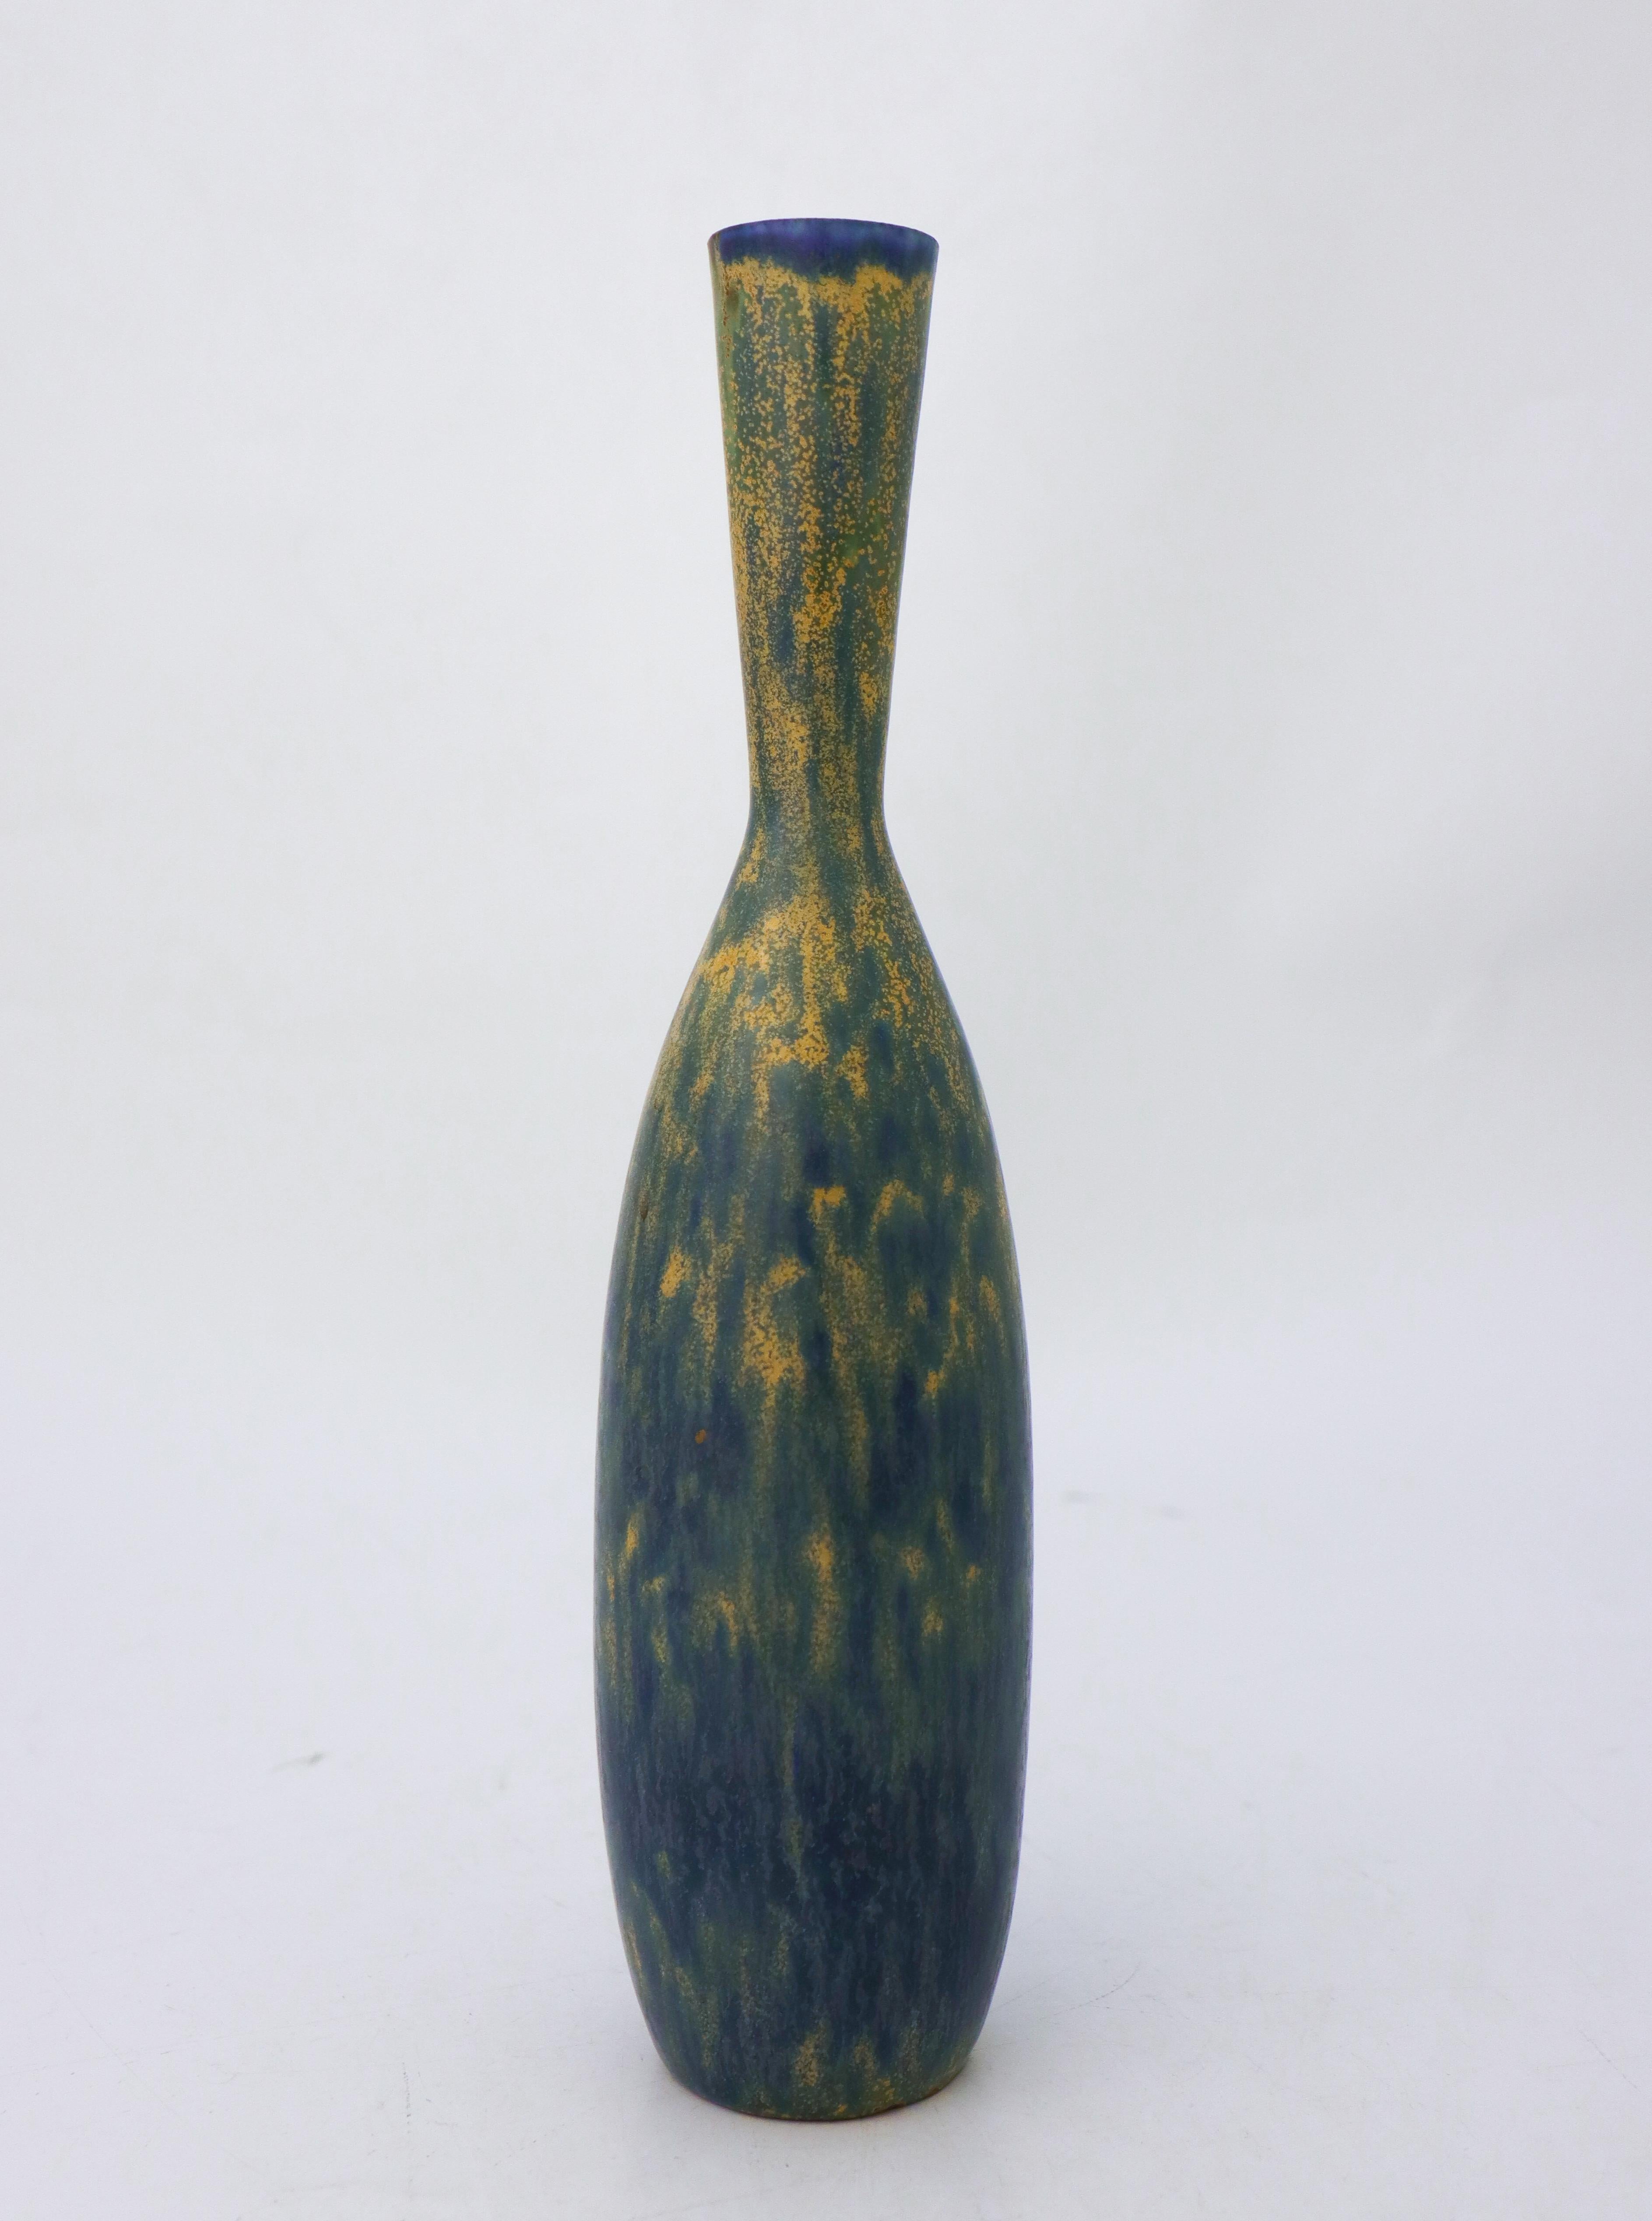 A vase with a lovely blue & yellow glaze designed by Carl-Harry Stålhane at Rörstrand. The vase is 28 cm (11.2